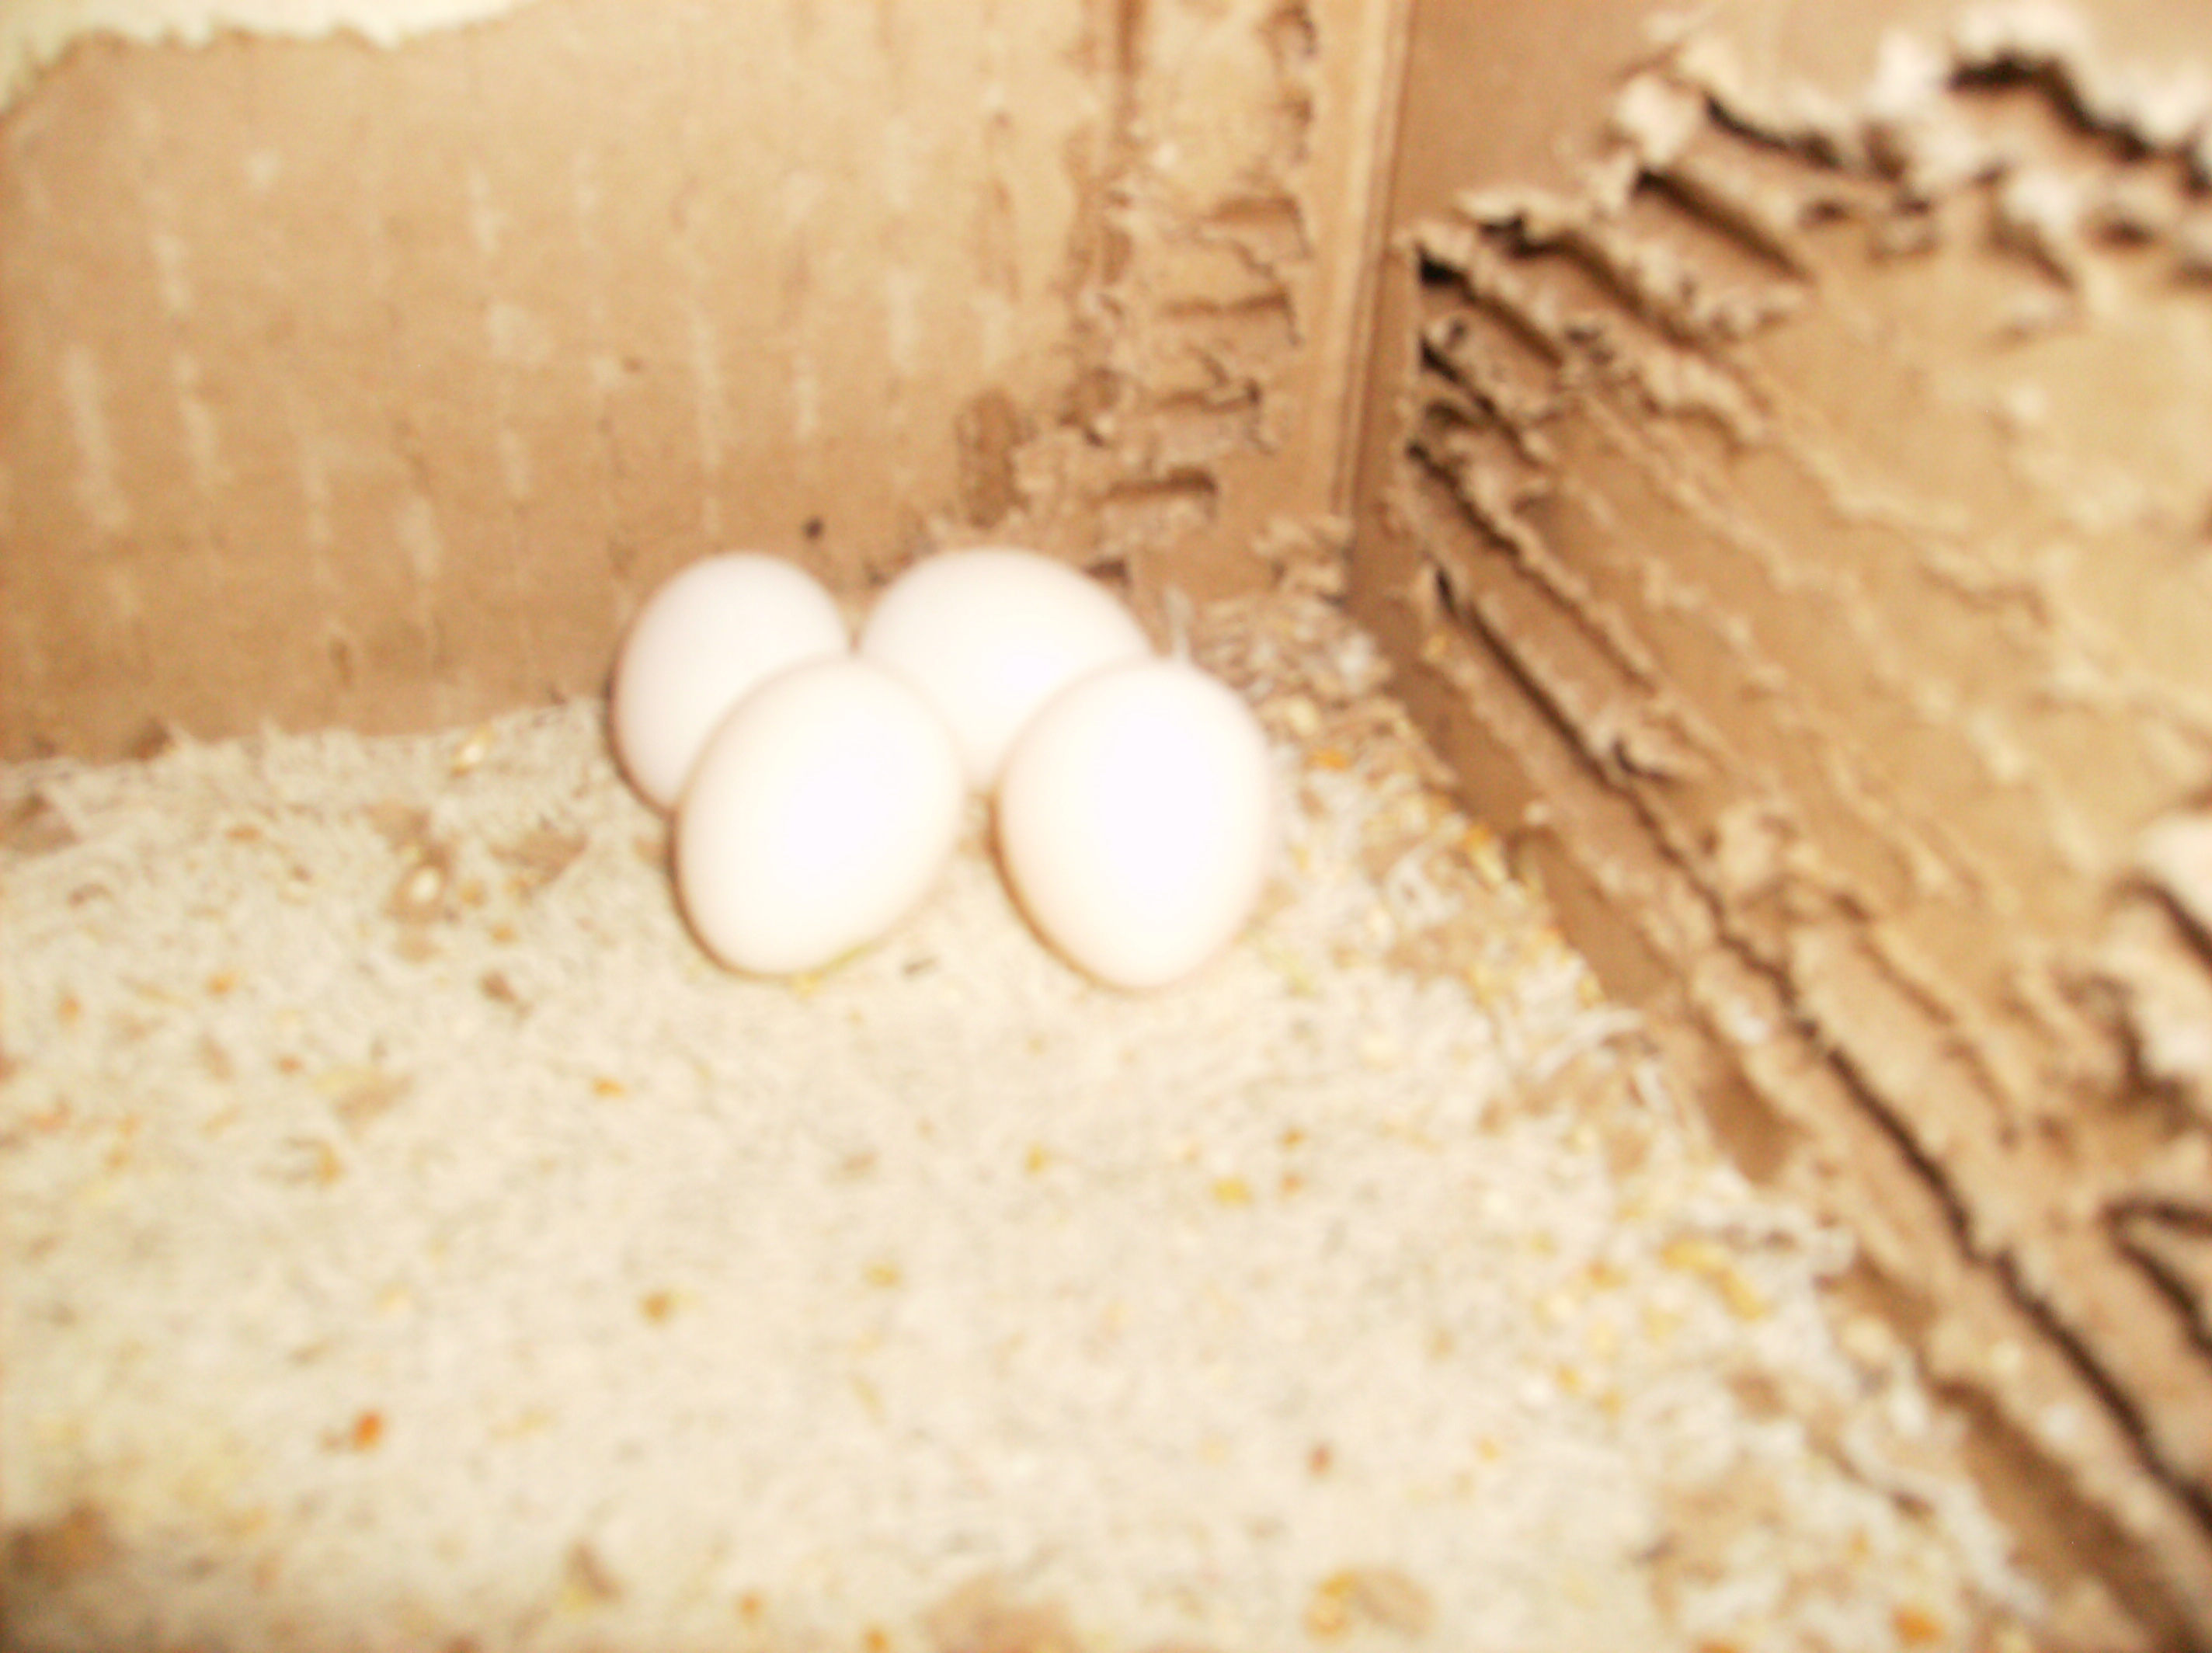 Typical Clutch of Eggs